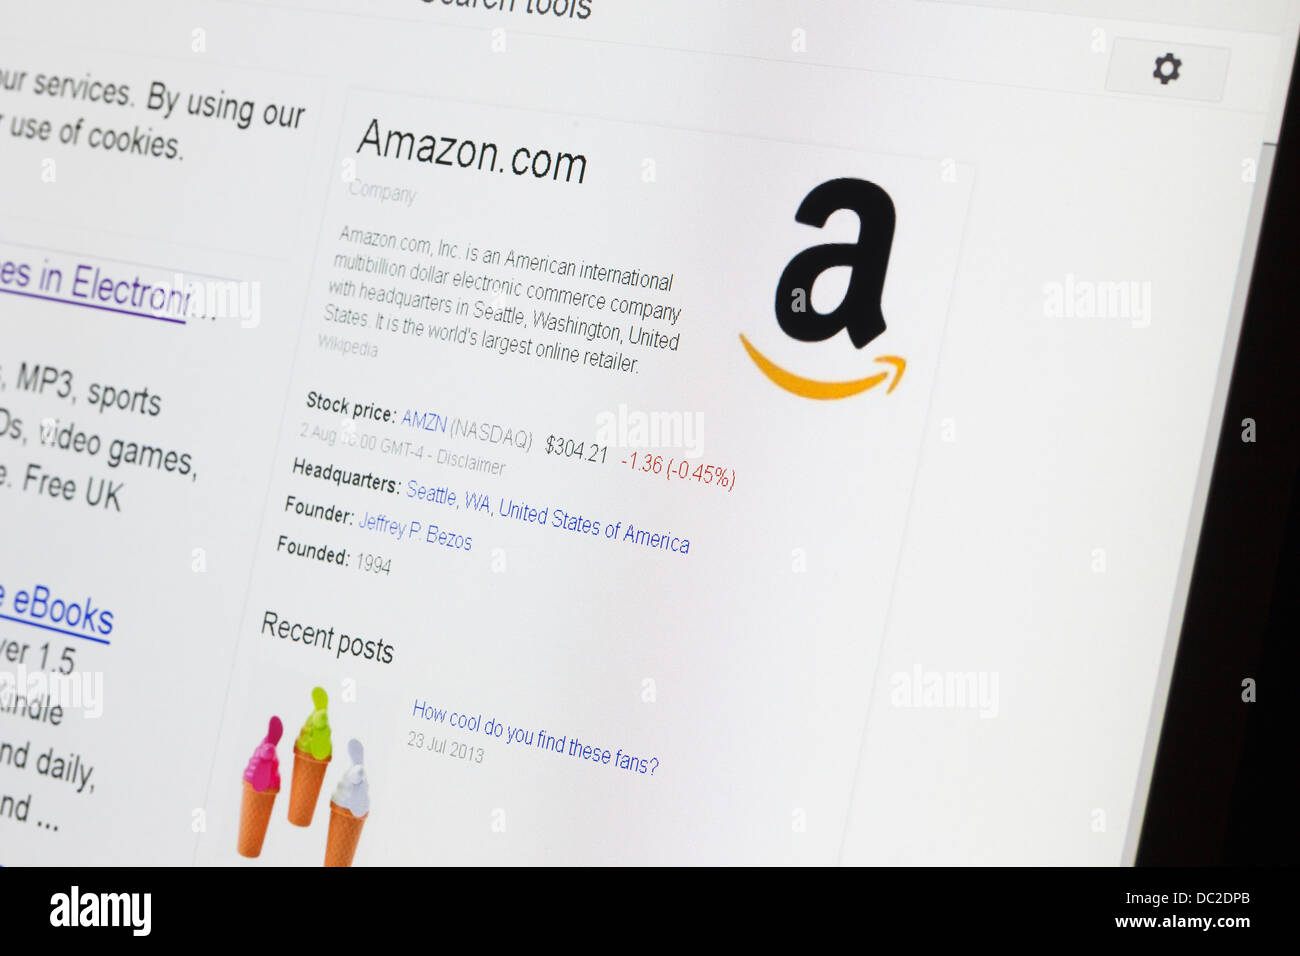 amazon.com browser information and logo Stock Photo